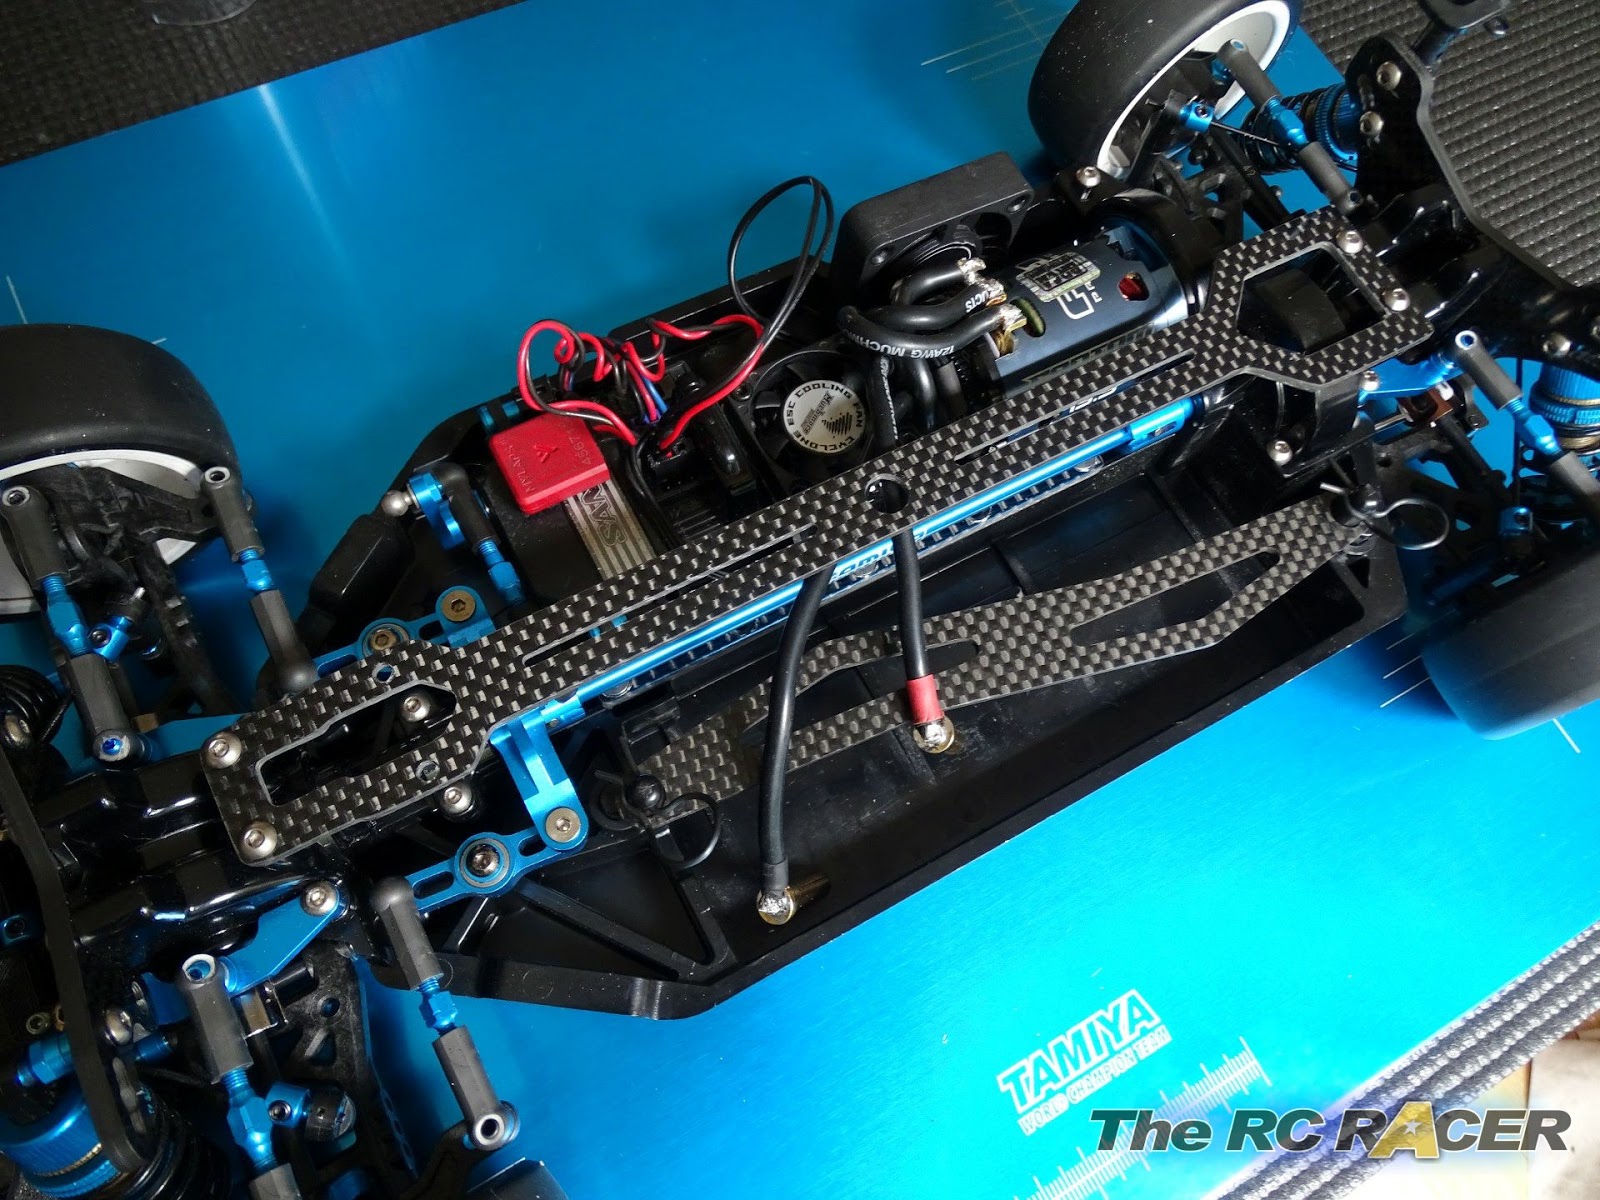 Thercracer Tamiya Tt02 Carbon Top Deck Available The Rc Racer